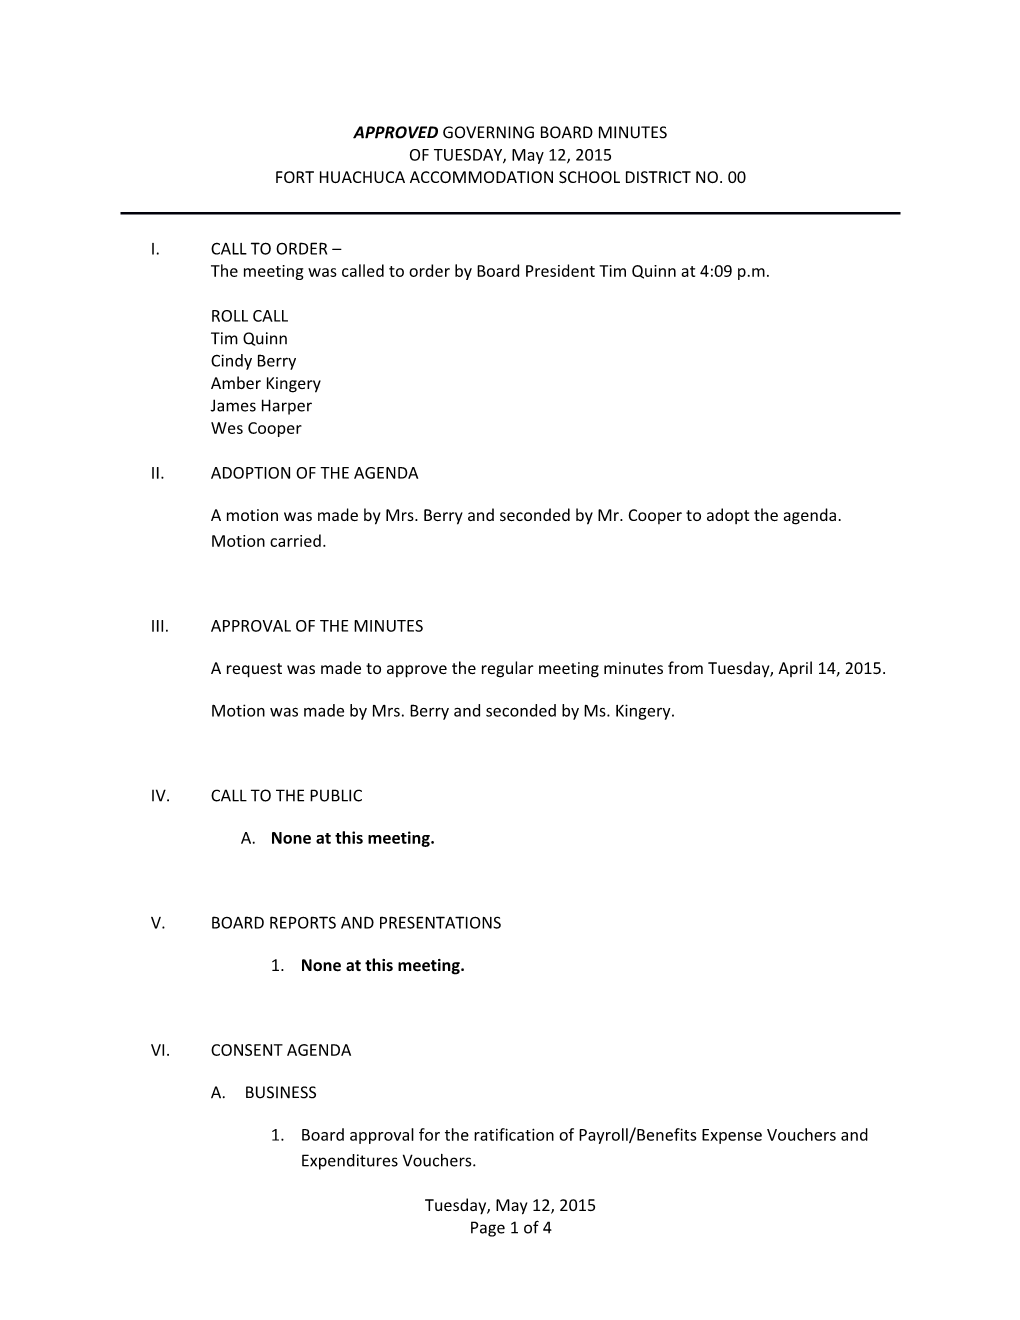 Approved Governing Board Minutes